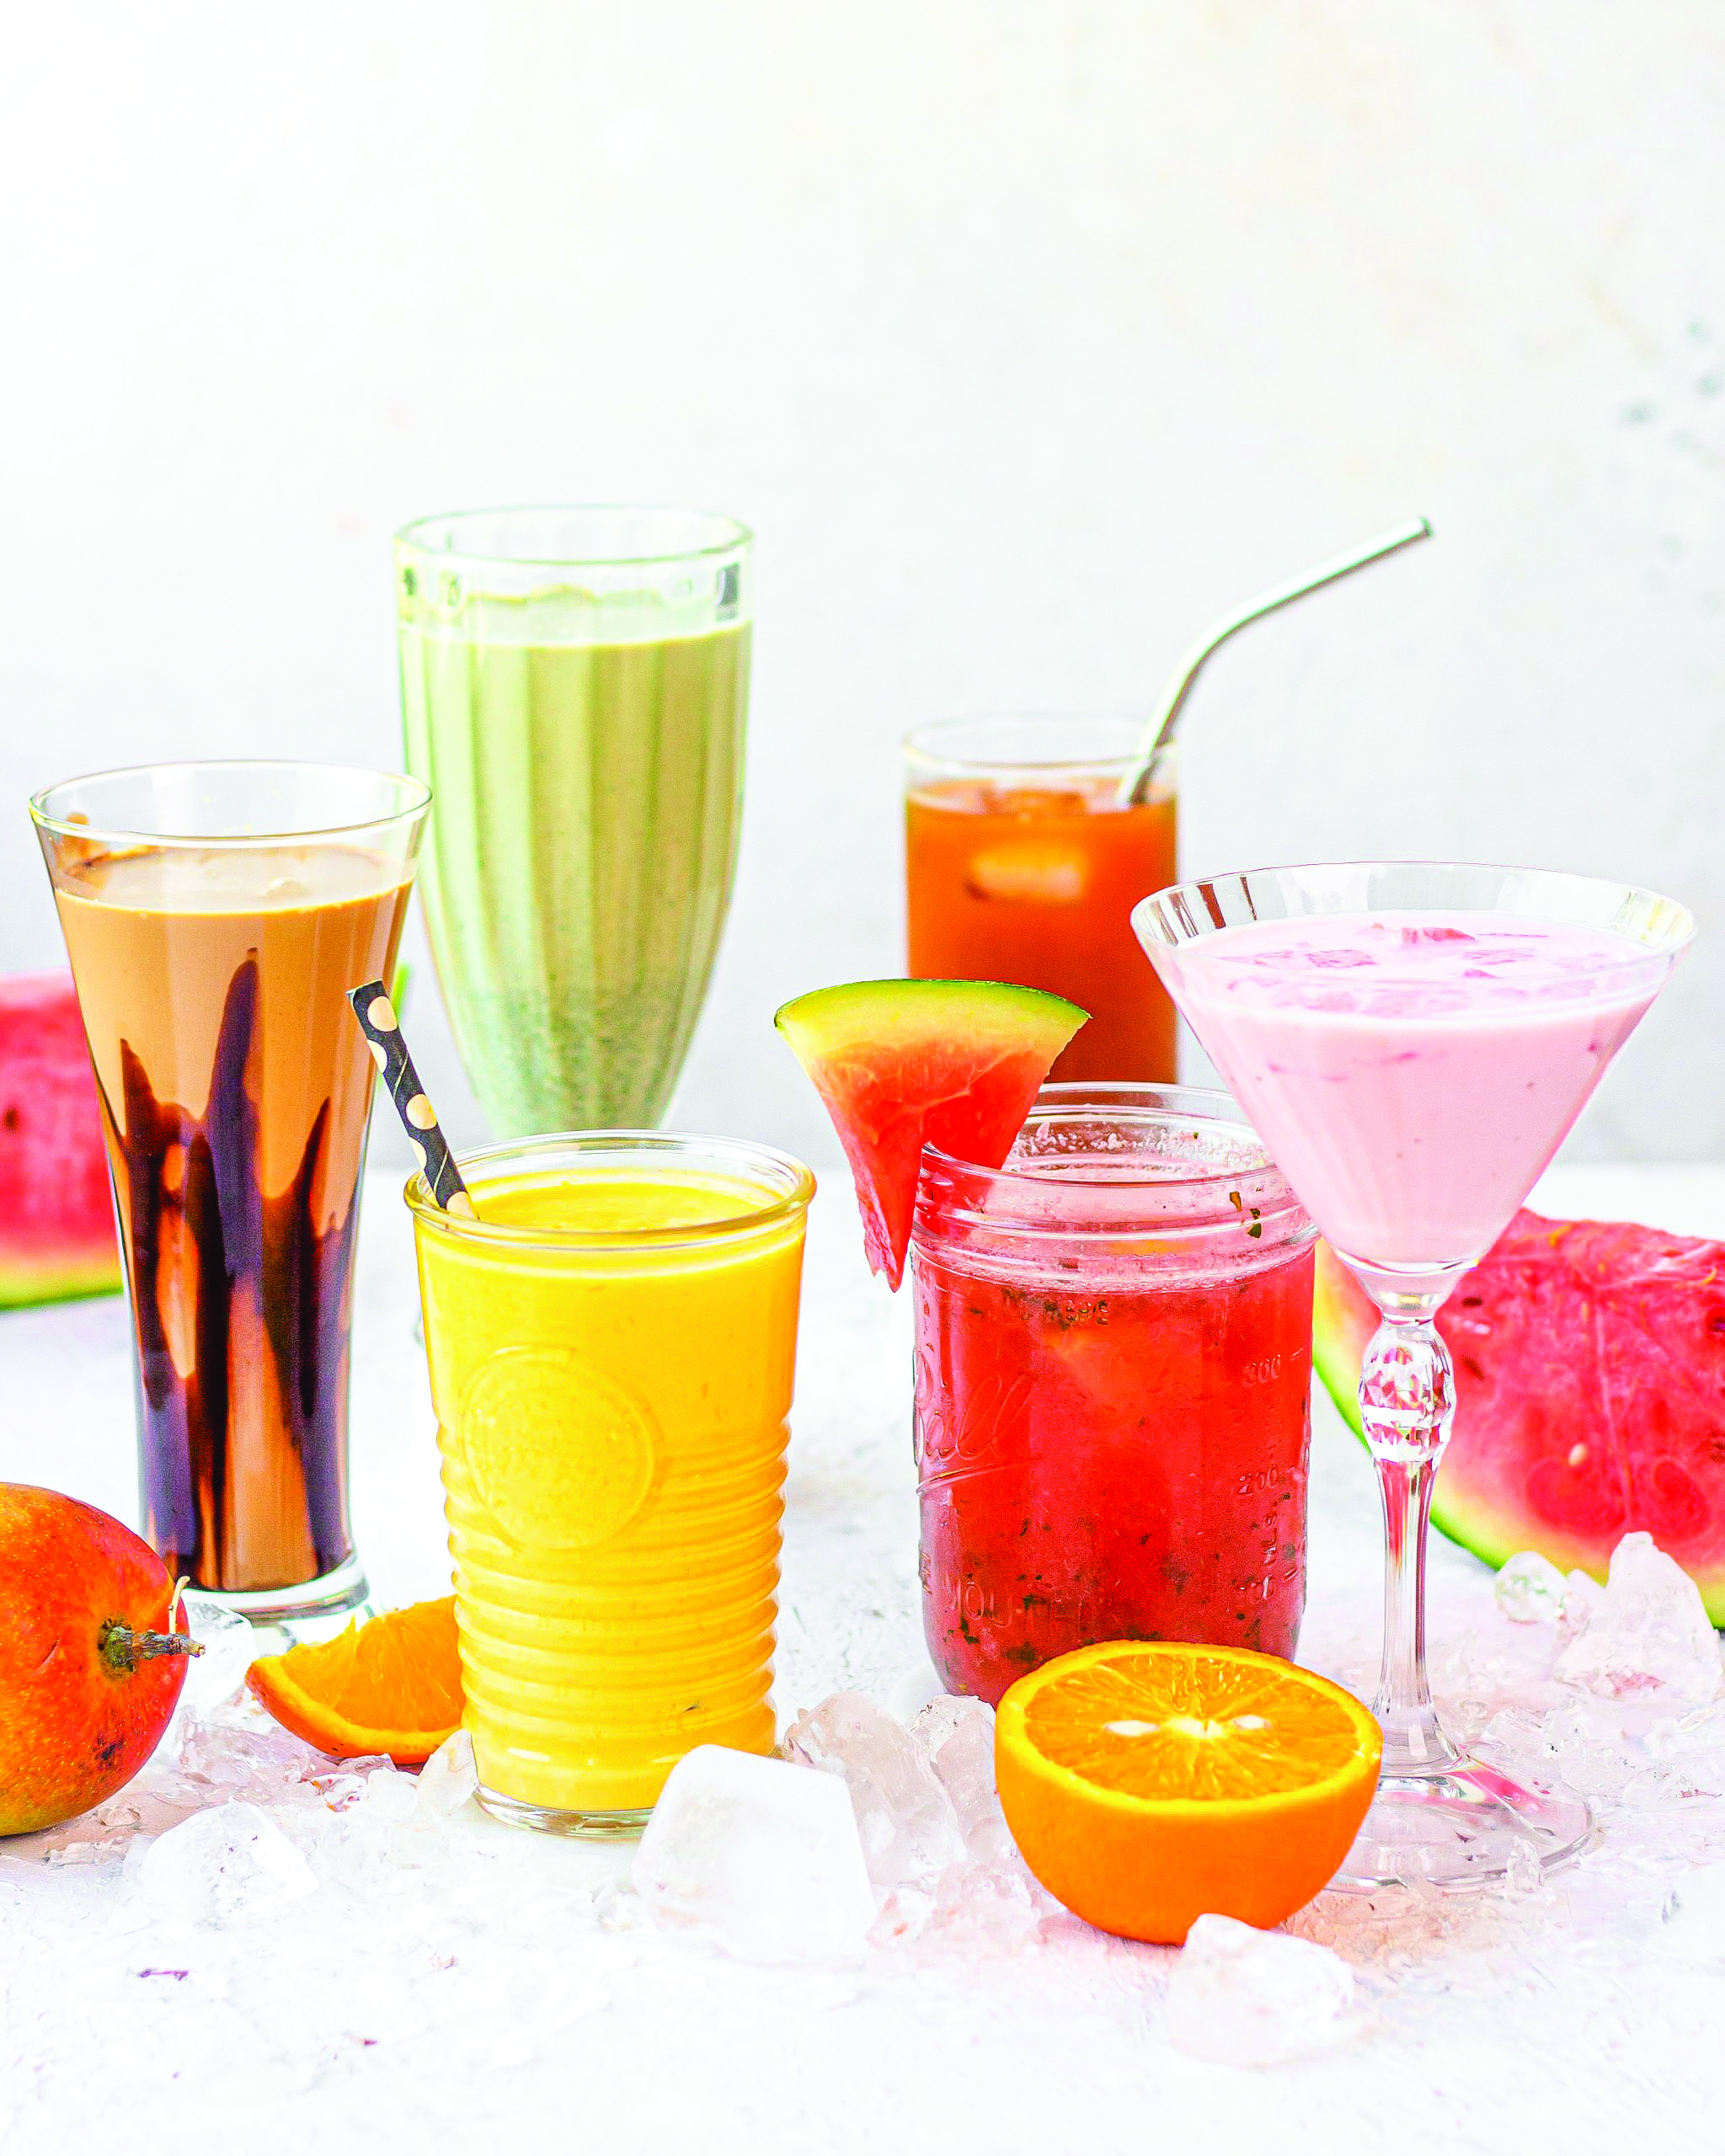 Beat the heat with delicious and refreshing options!